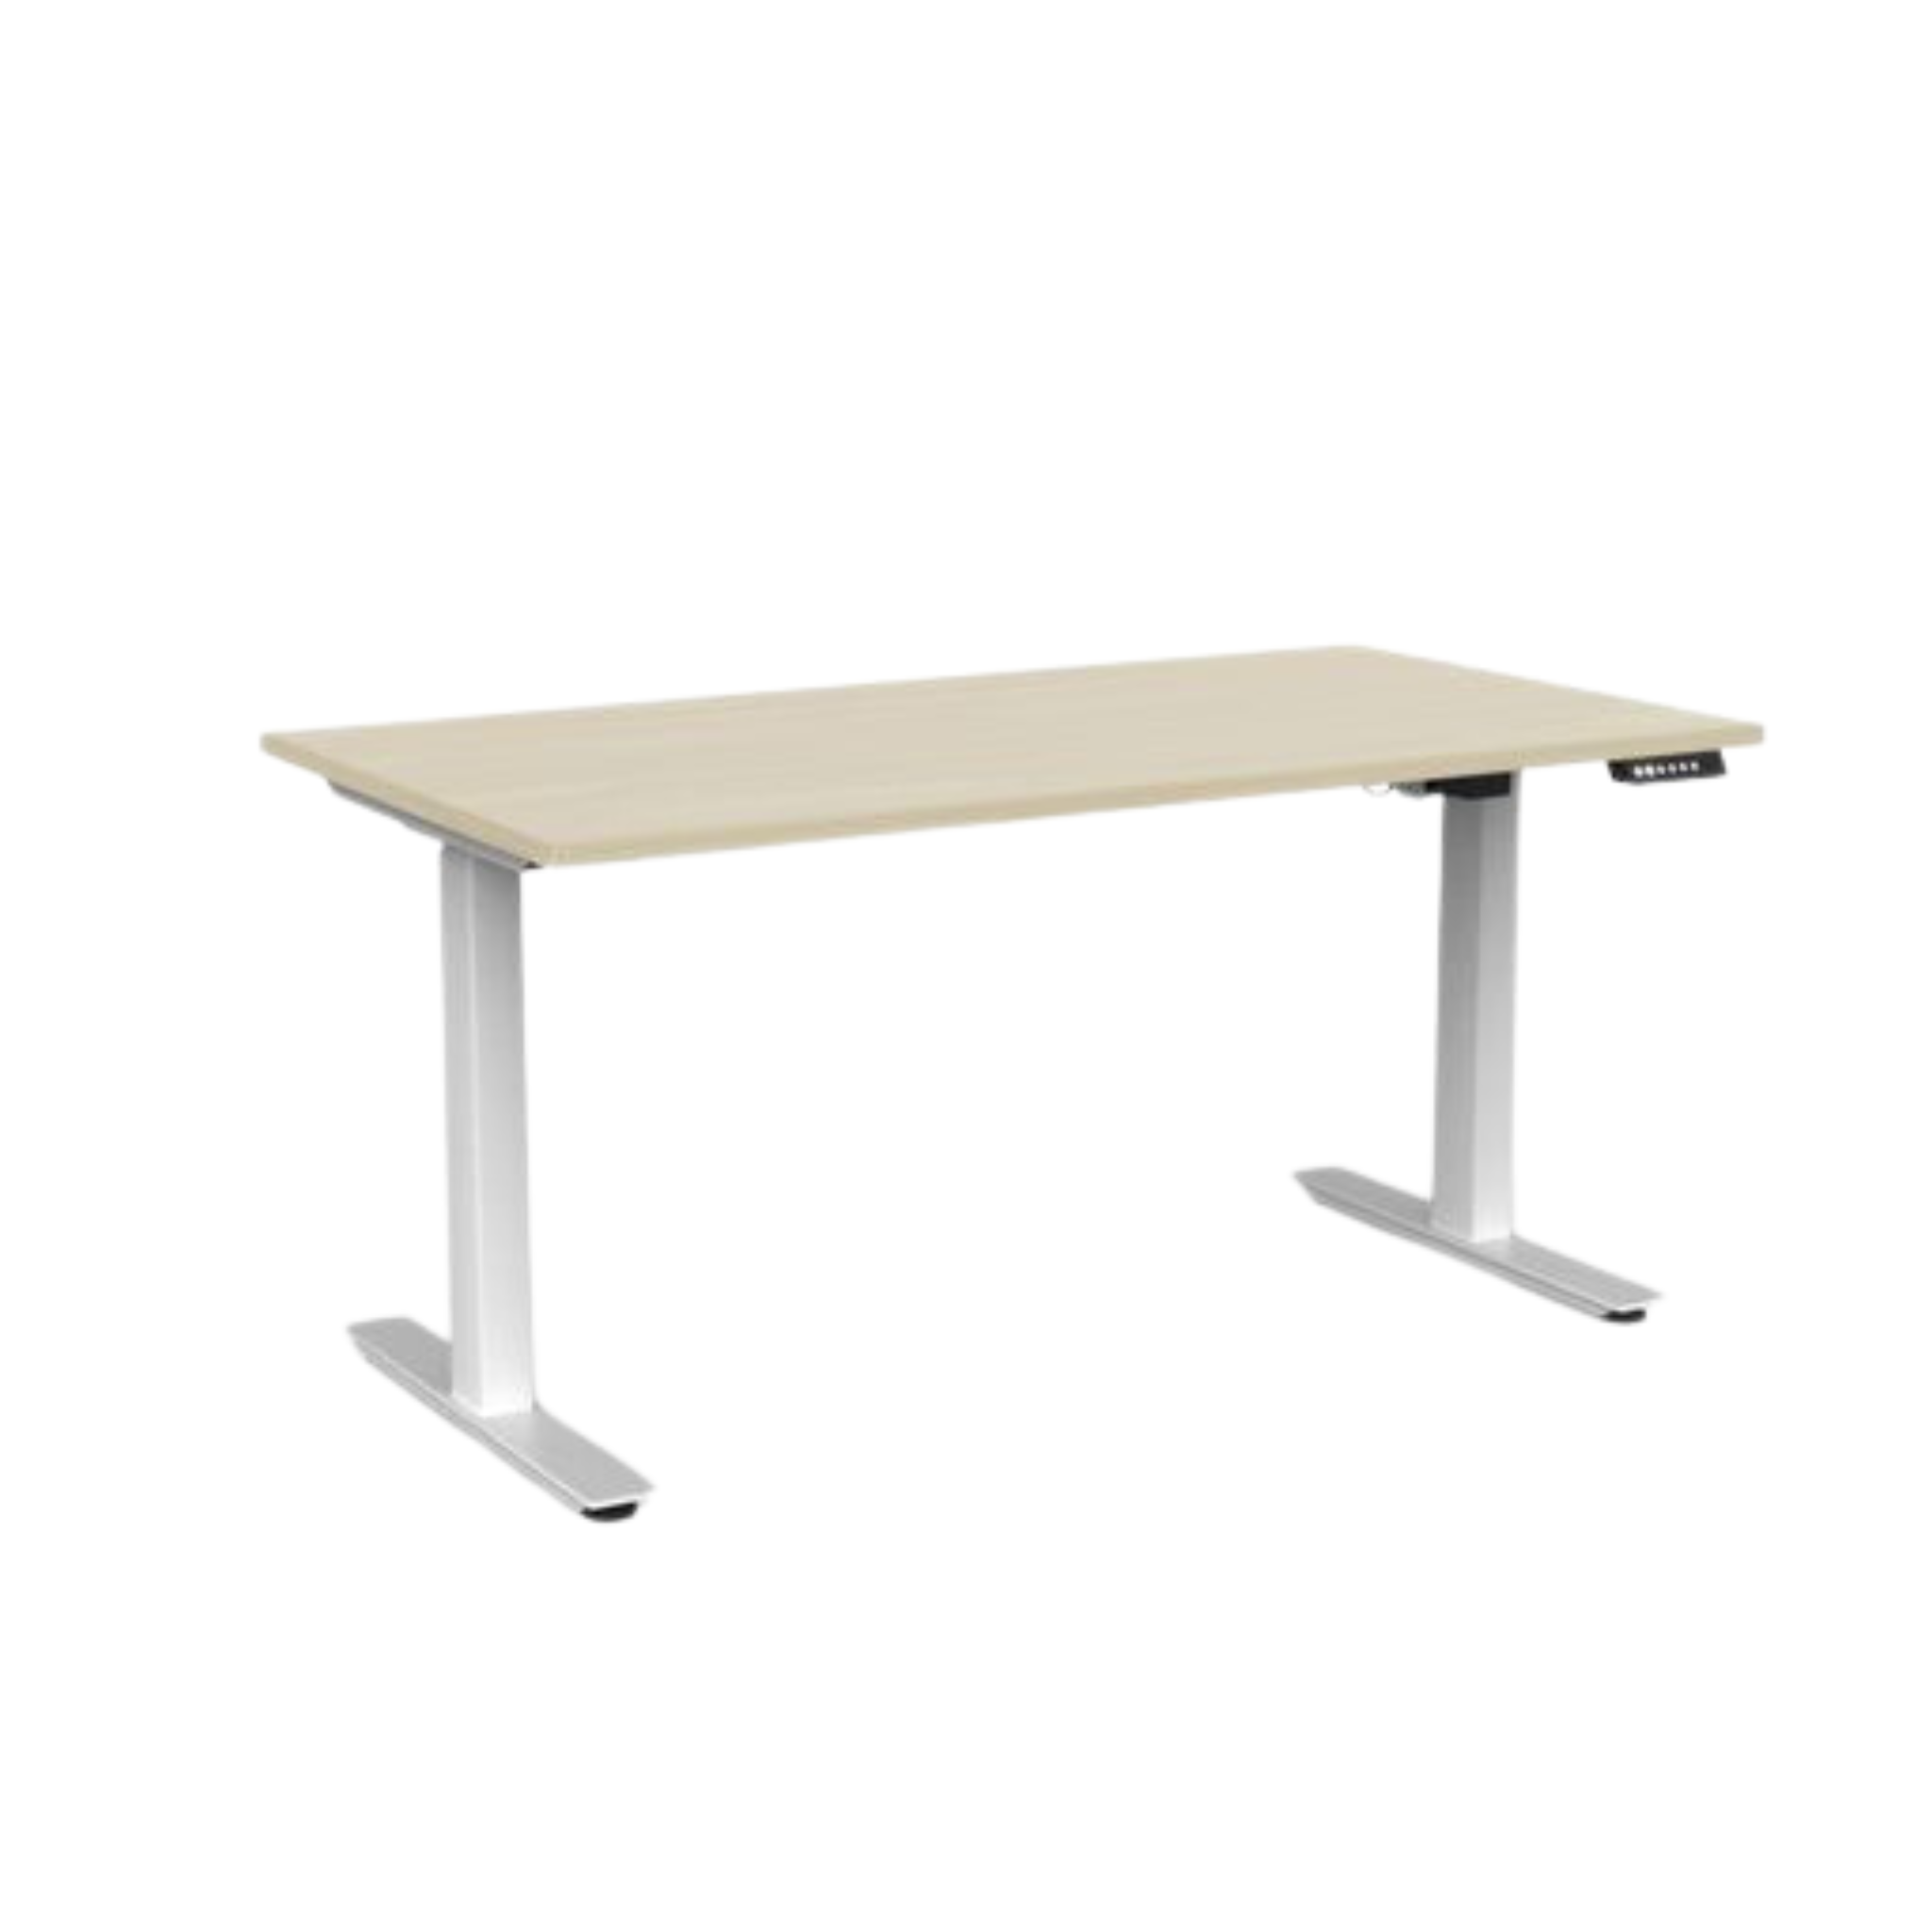 Agile 2 electric sit to stand desk with white frame and nordic maple top